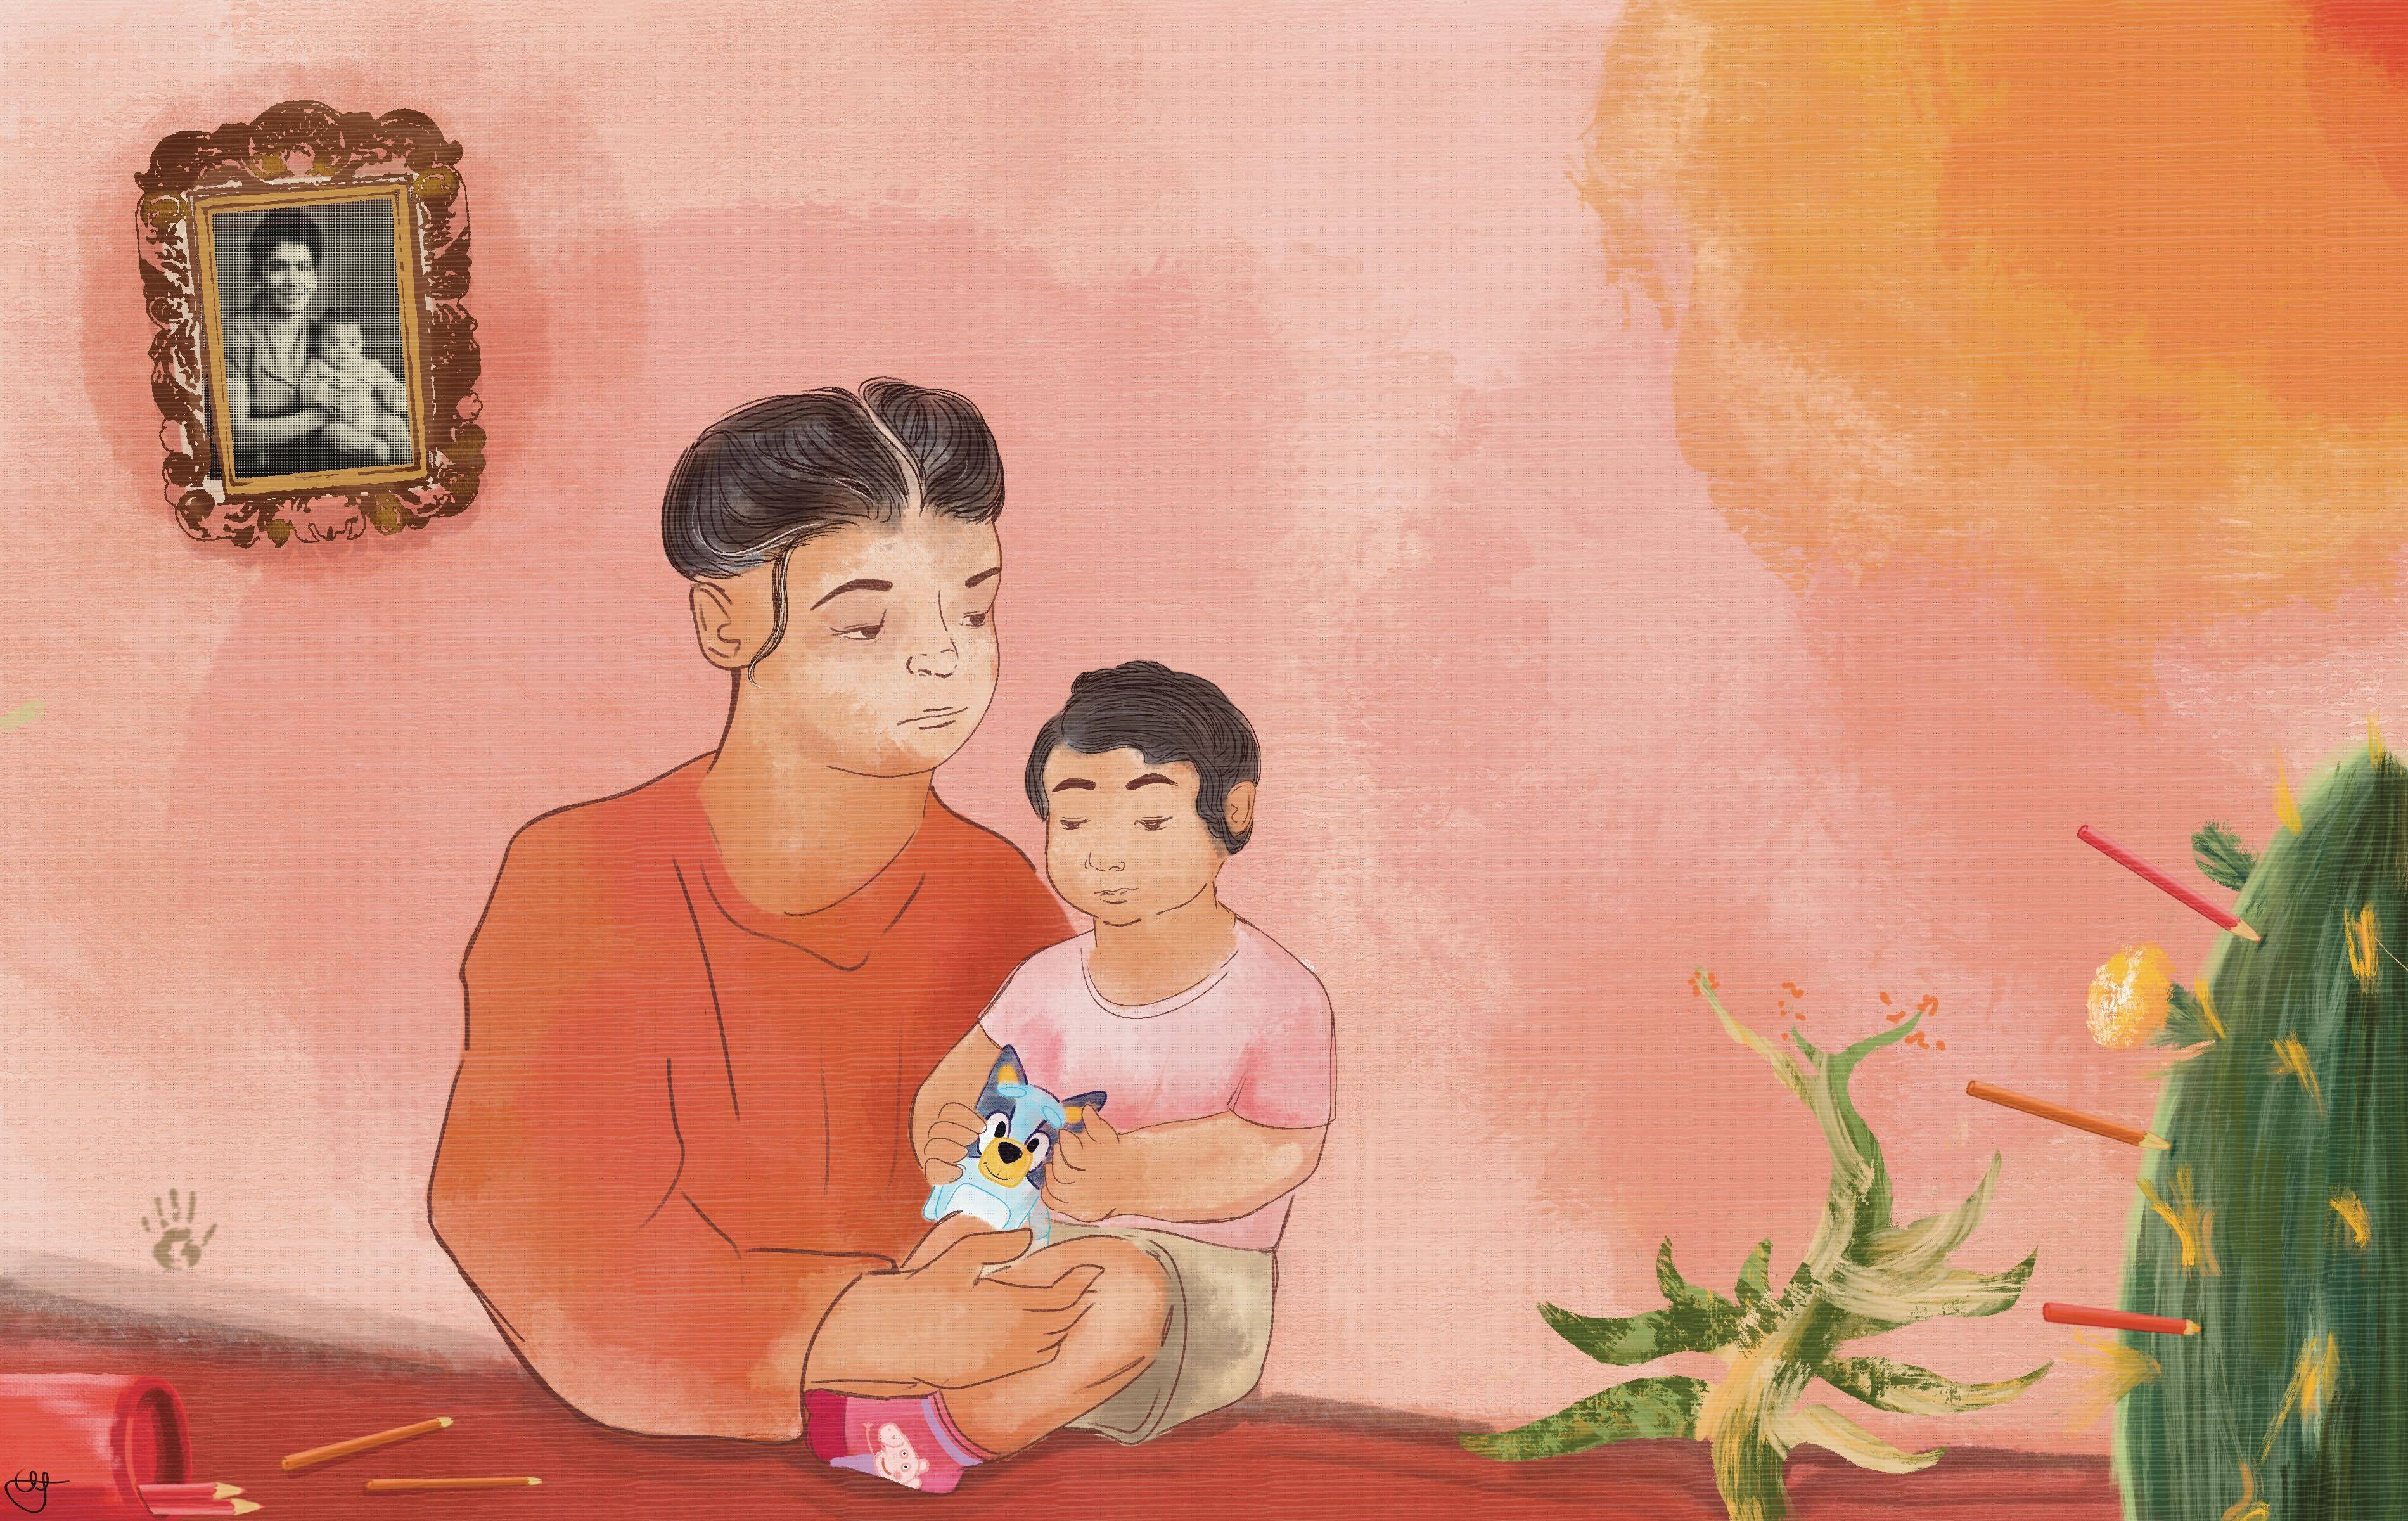 An illustration of a Latino mother and her small child in their home. There are pencils stuck in a cactus and a picture hanging askew on the wall.